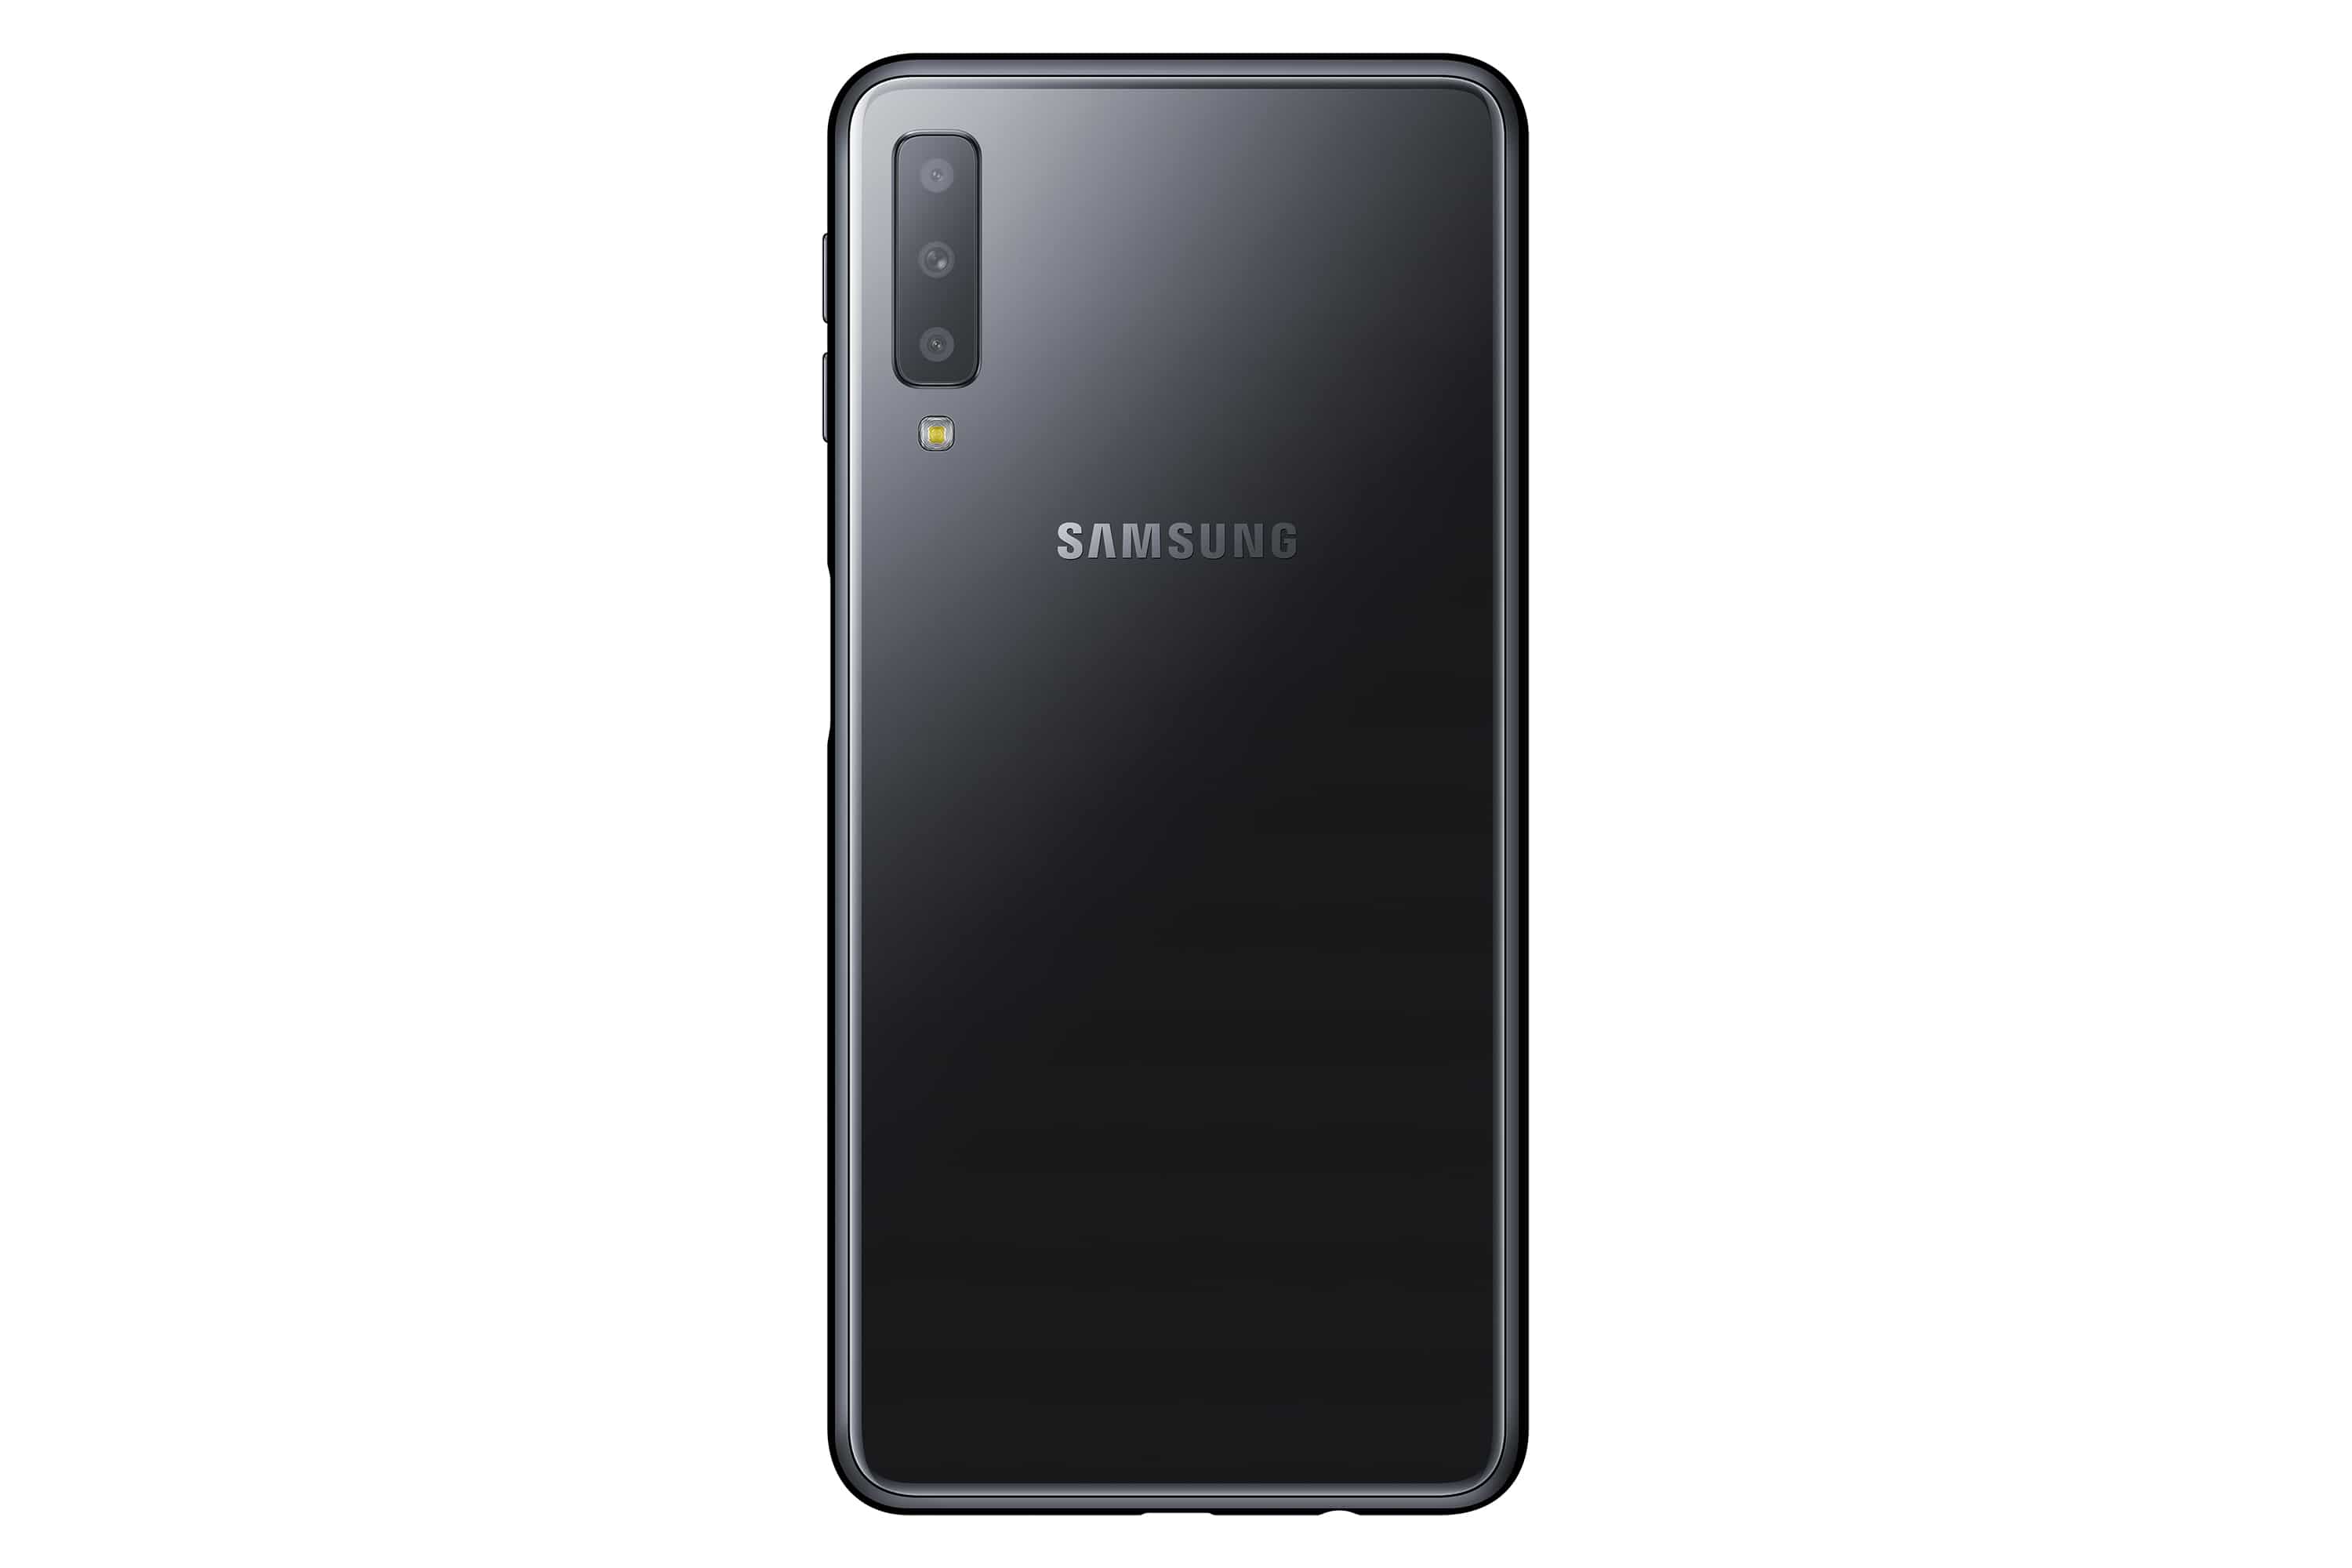 This new phone has 3 cameras! Check out the Samsung Galaxy